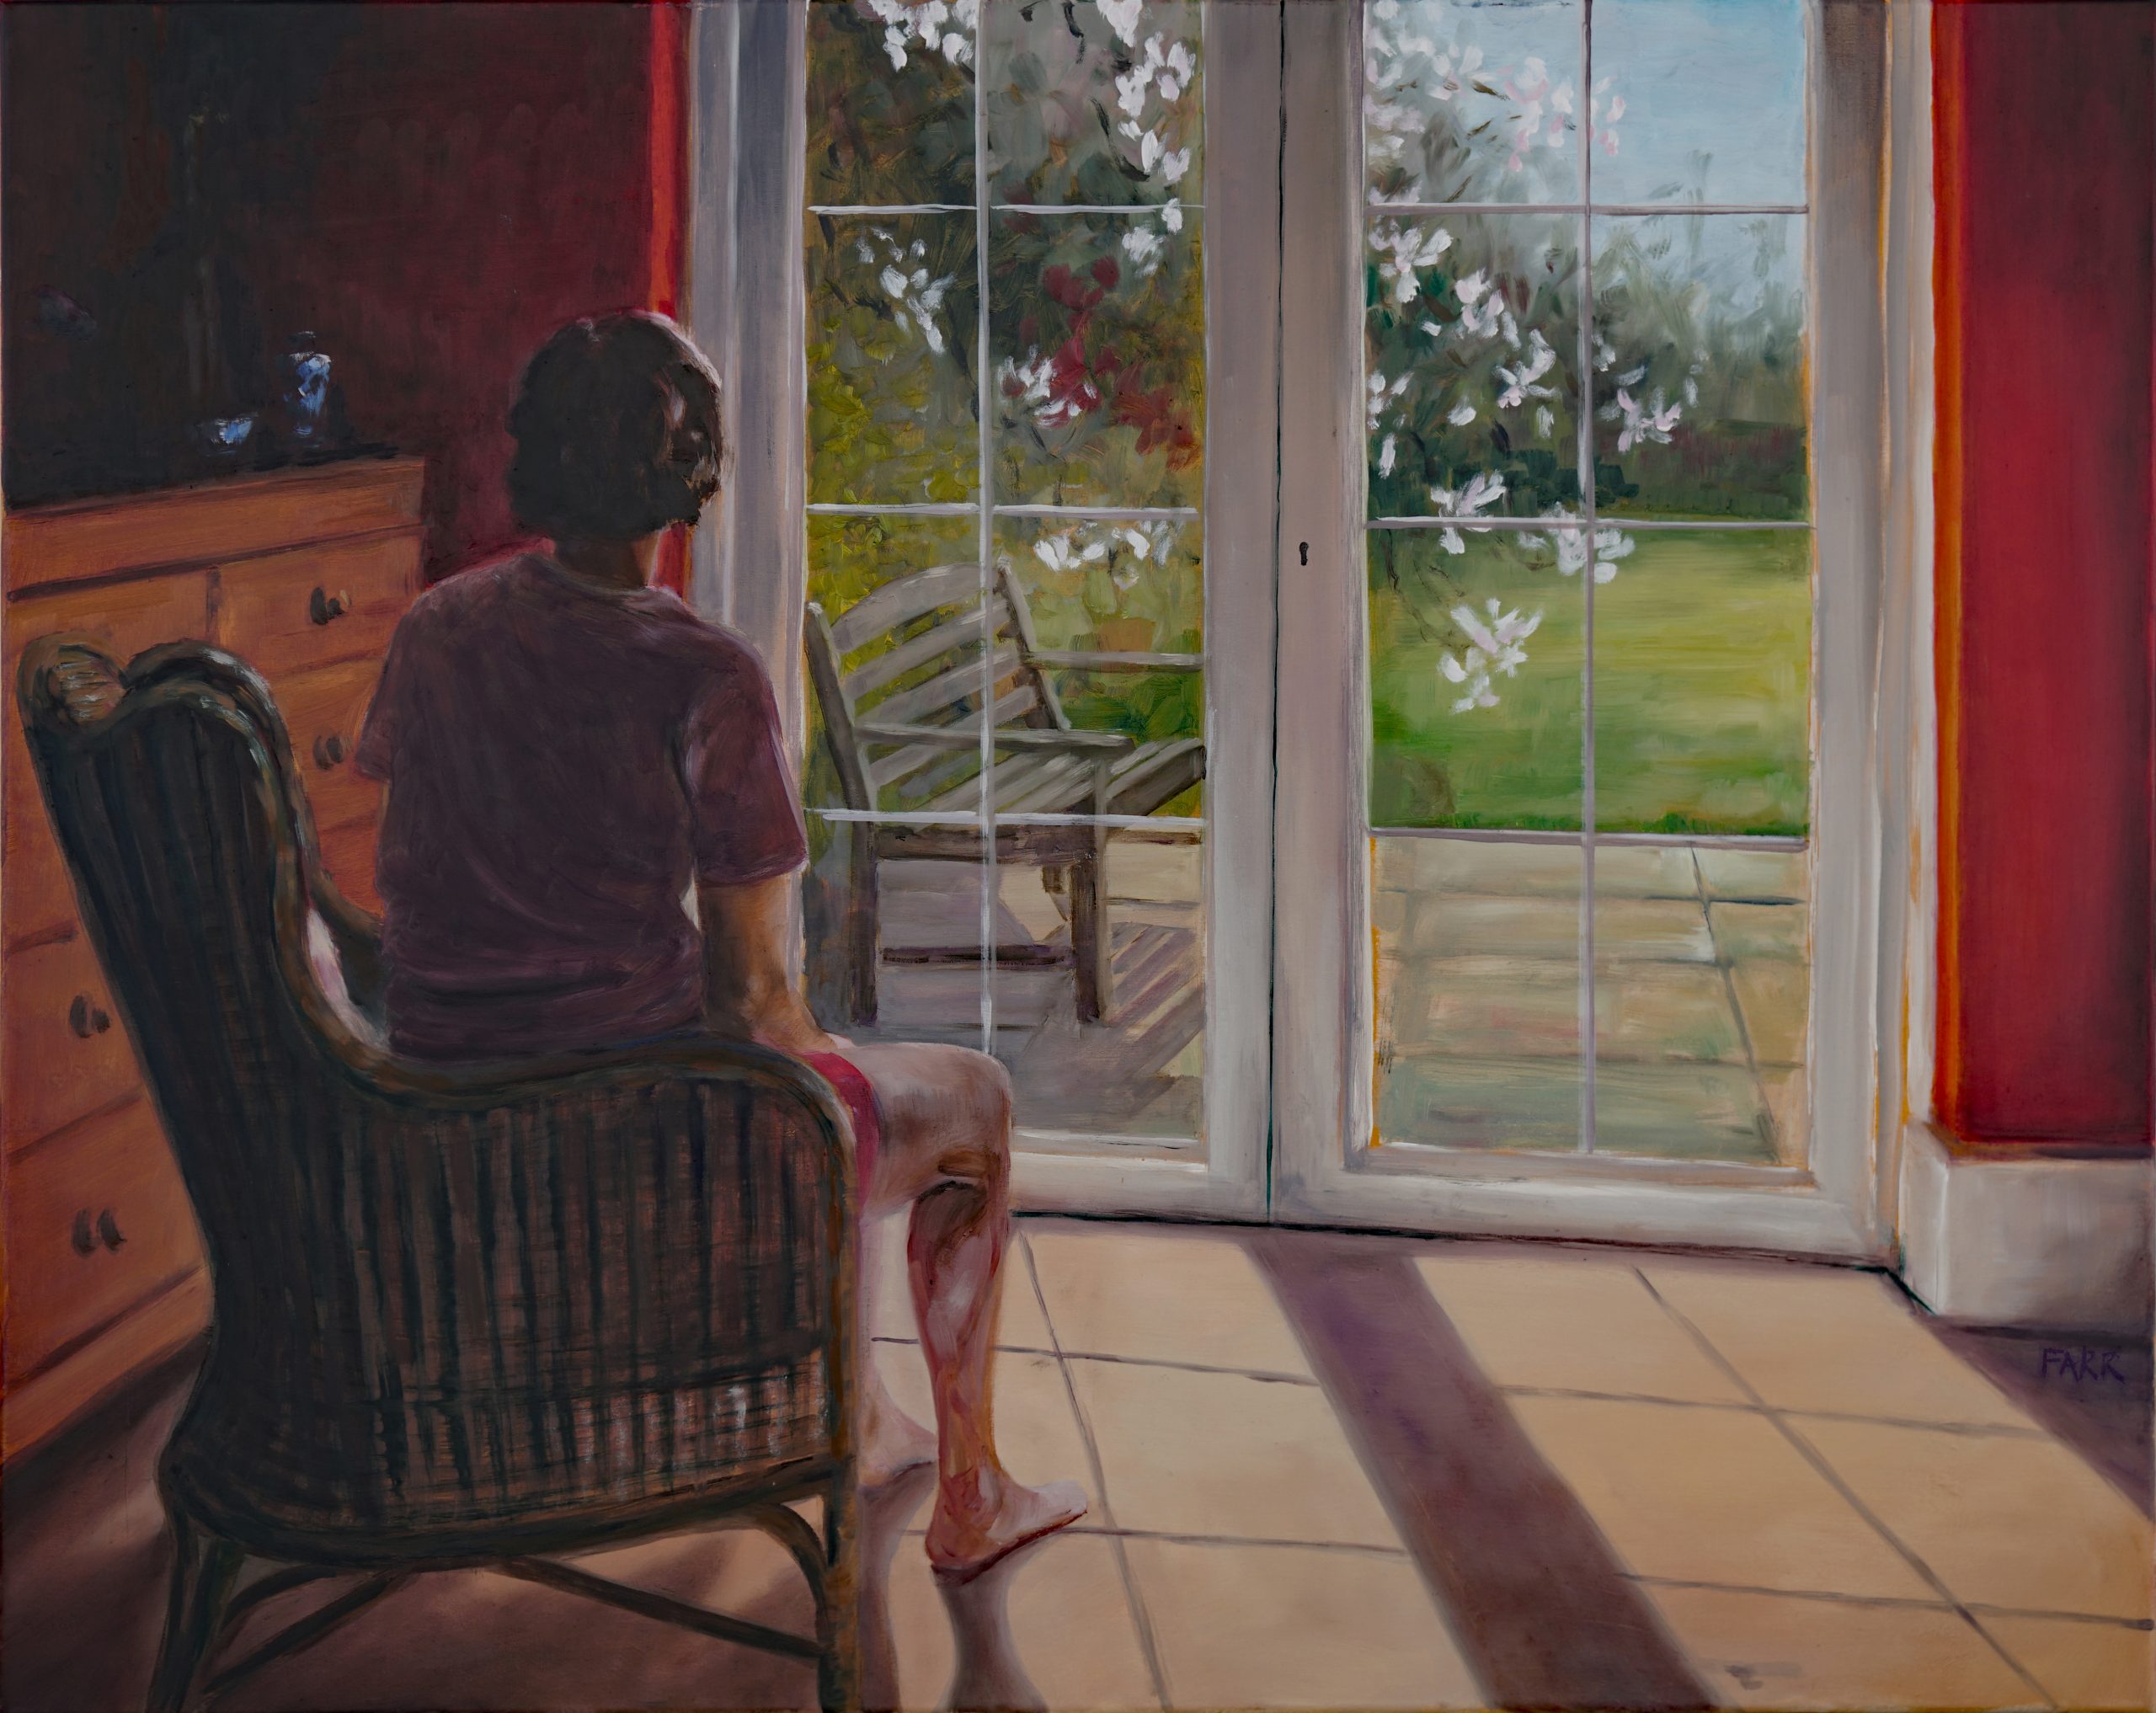 Artwork - a person sits in a chair, looking out of their window